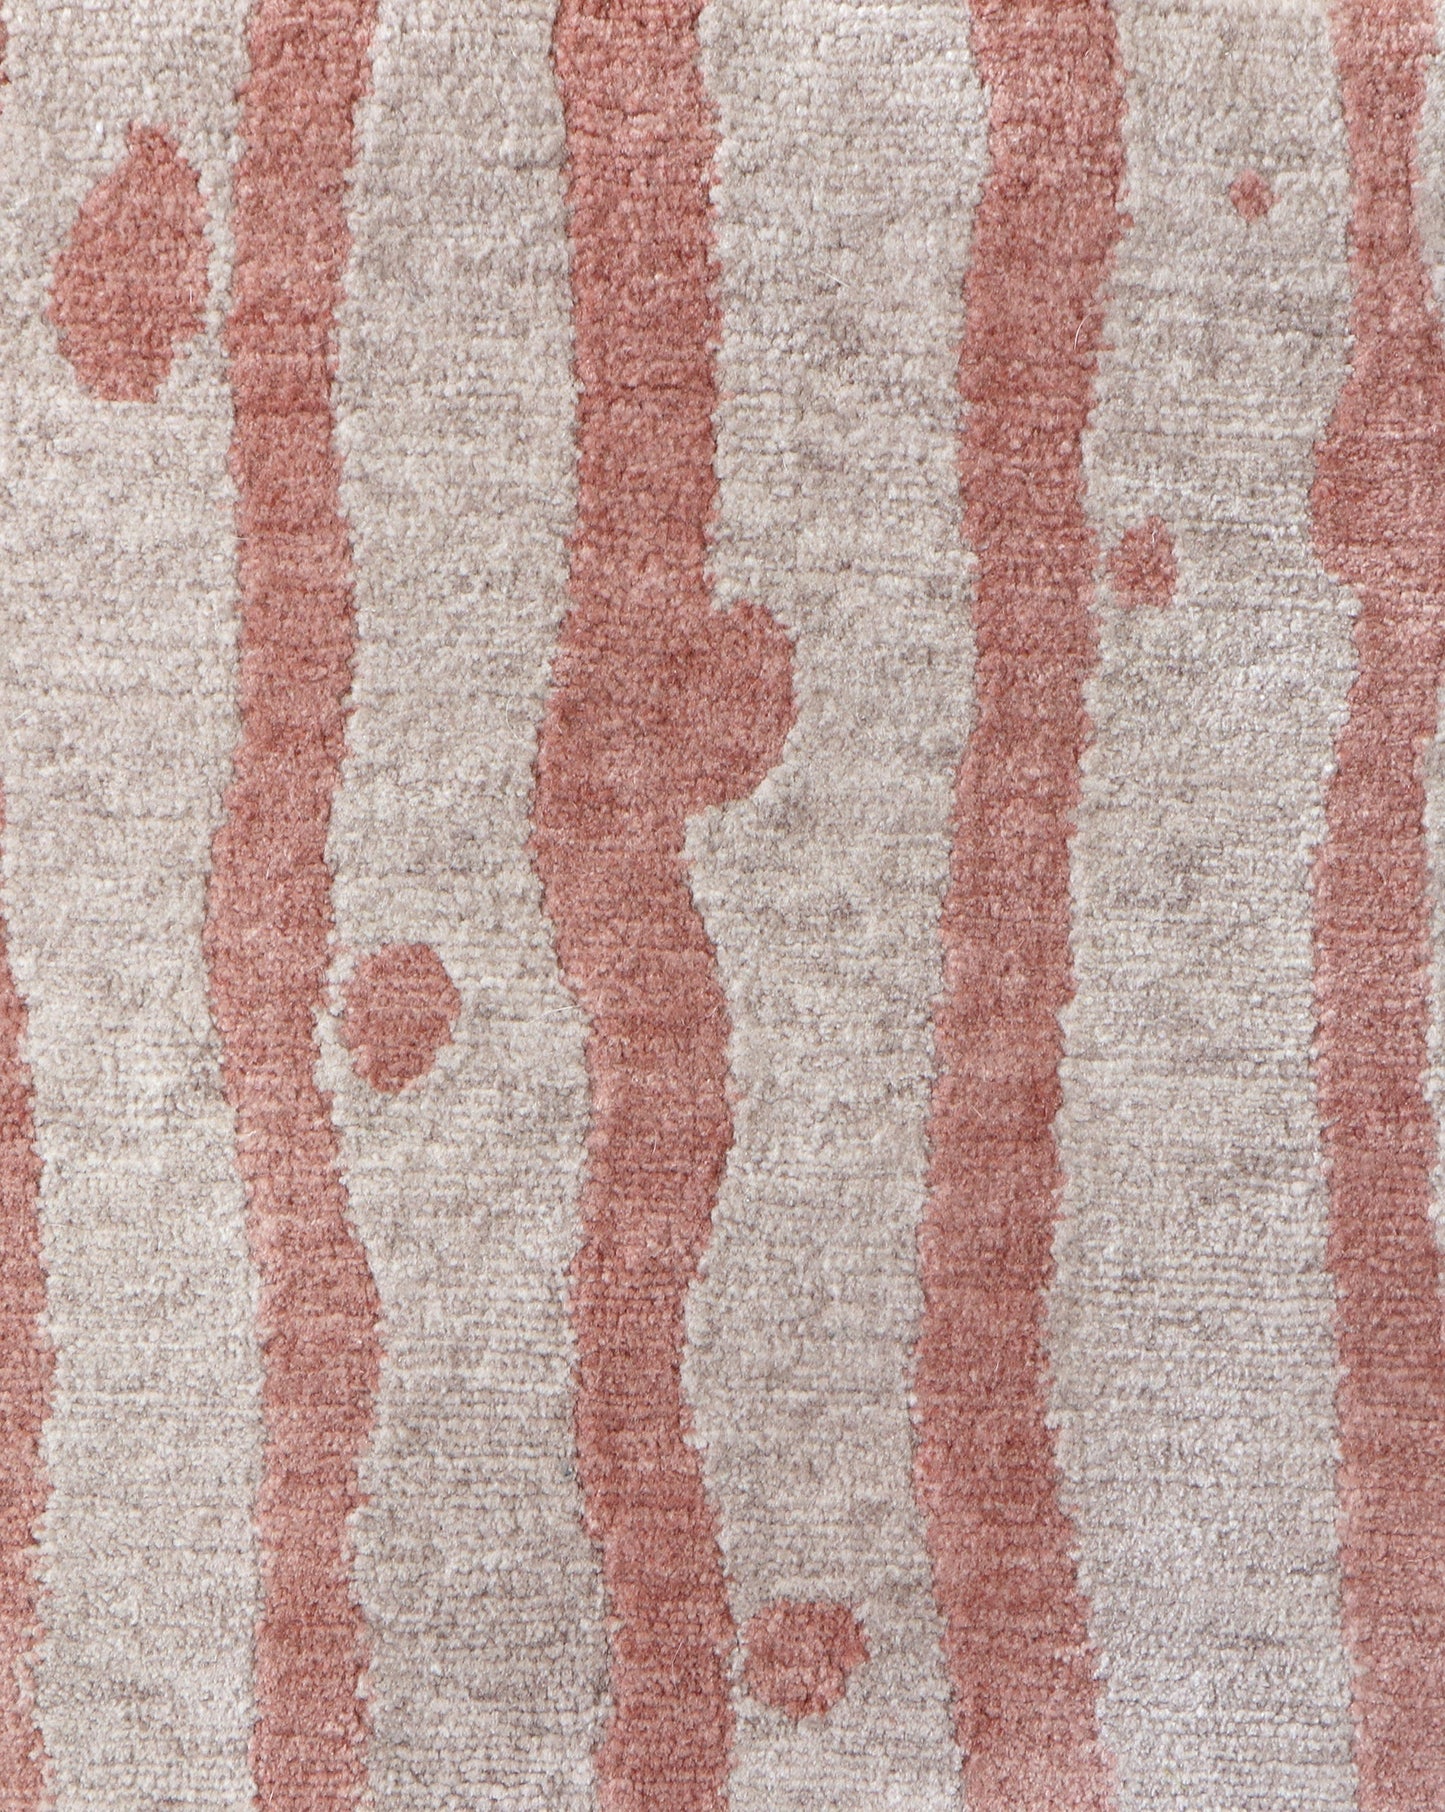 A Drippy Stripe Hand Knotted Rug 6' x 9' Sienna with rosy pink stripes on it